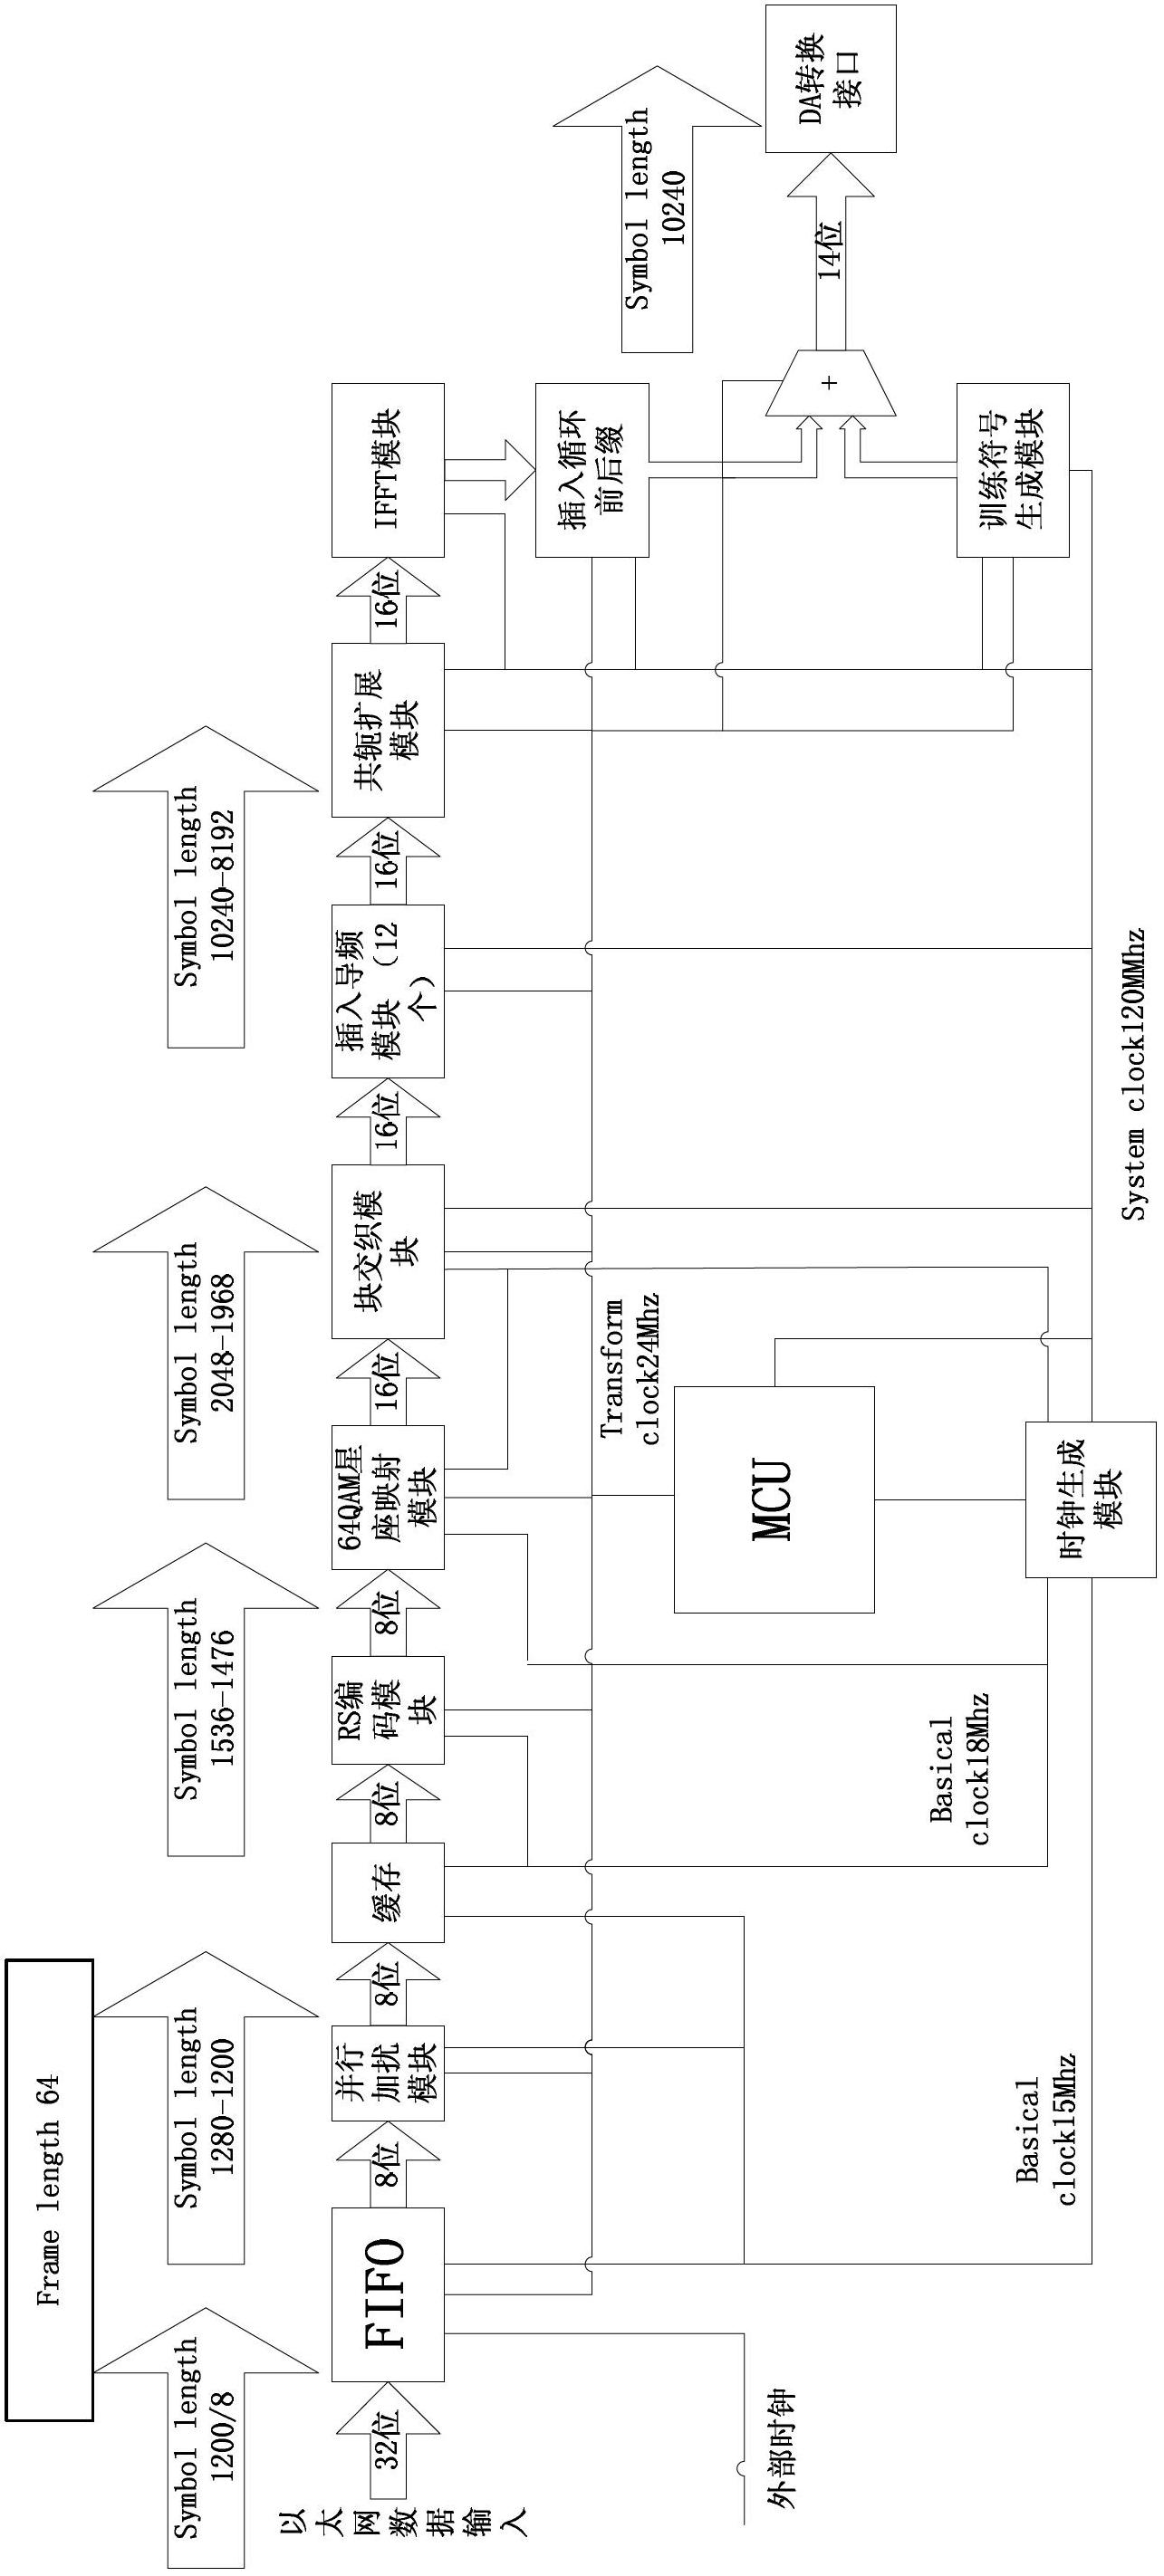 DMT (Discrete Multi-Tone)-based transmission method and device of high-speed 1553B communication bus